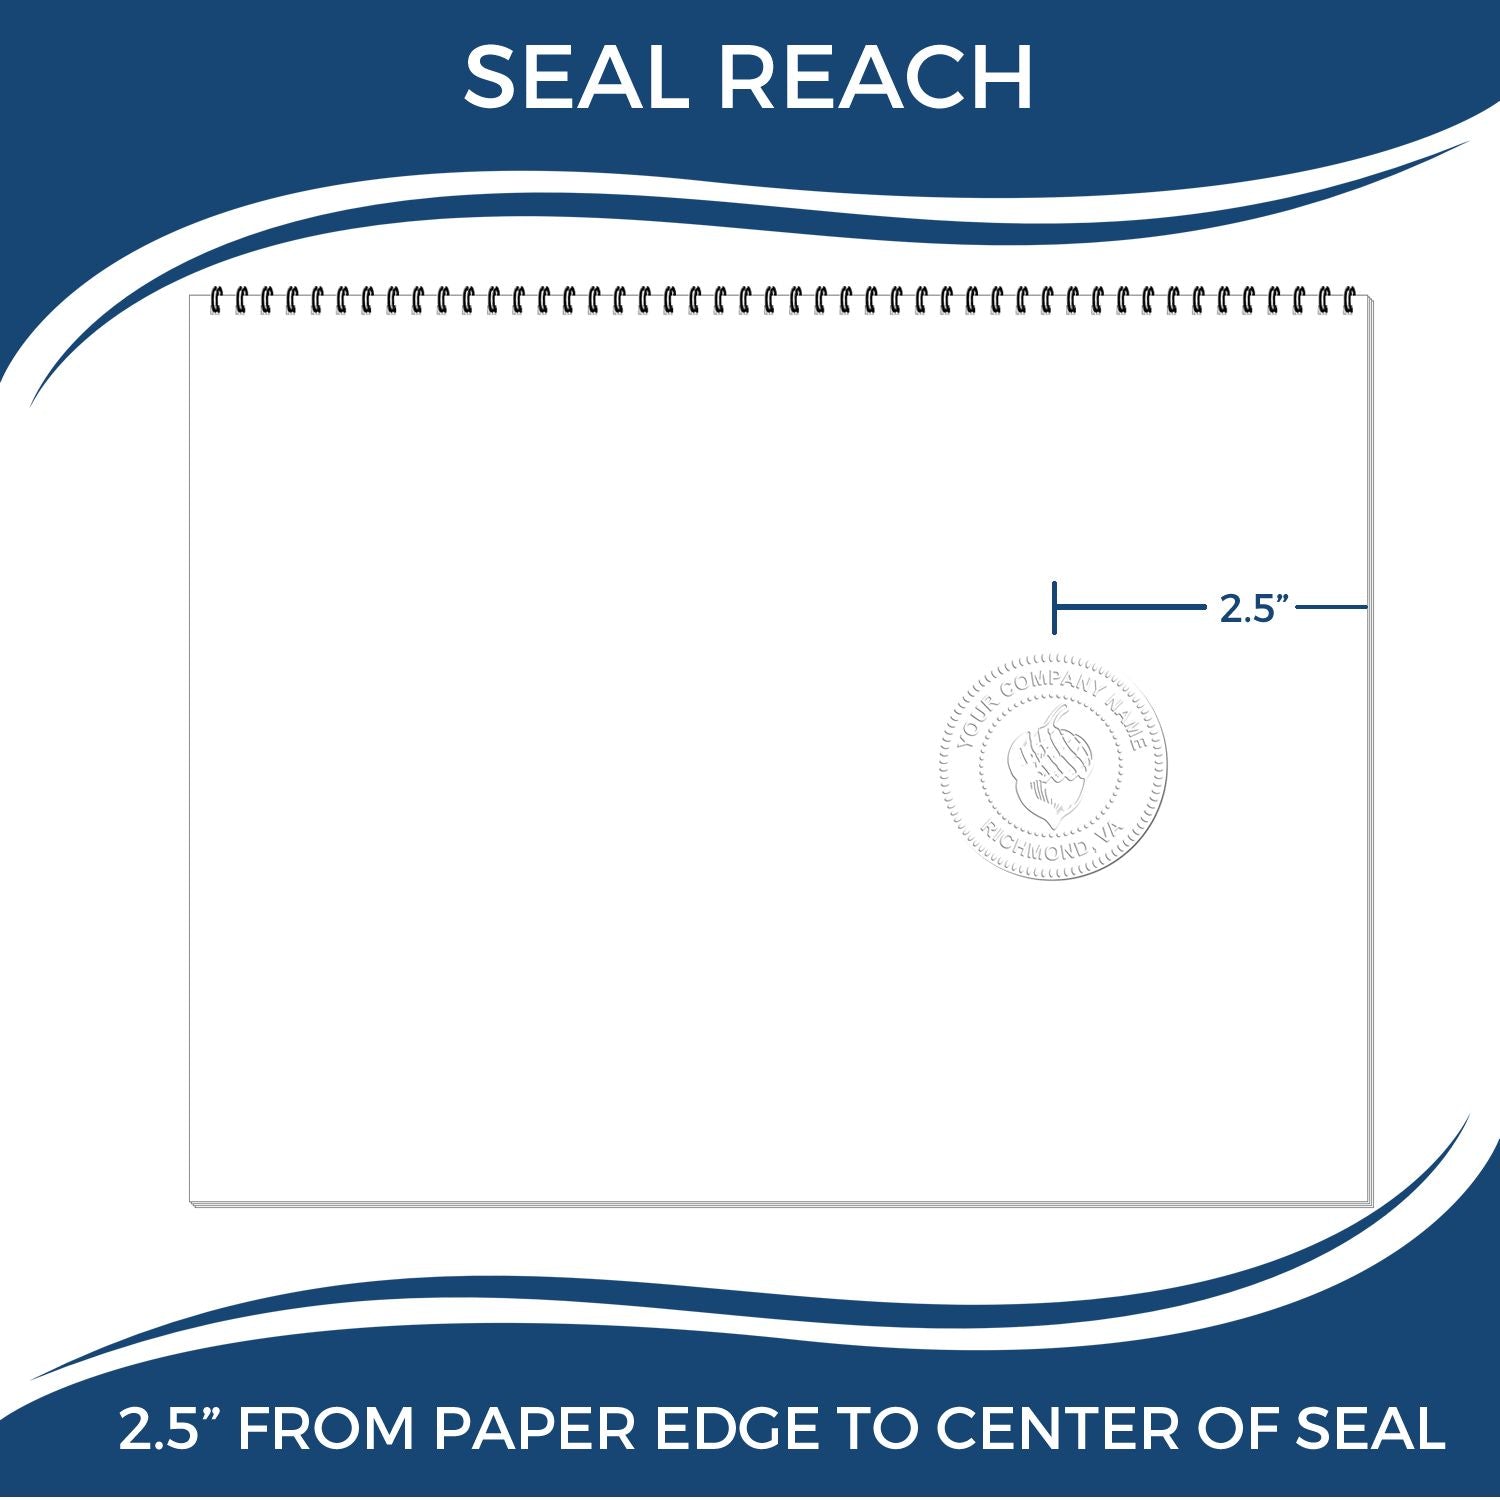 An infographic showing the seal reach which is represented by a ruler and a miniature seal image of the Long Reach Puerto Rico PE Seal